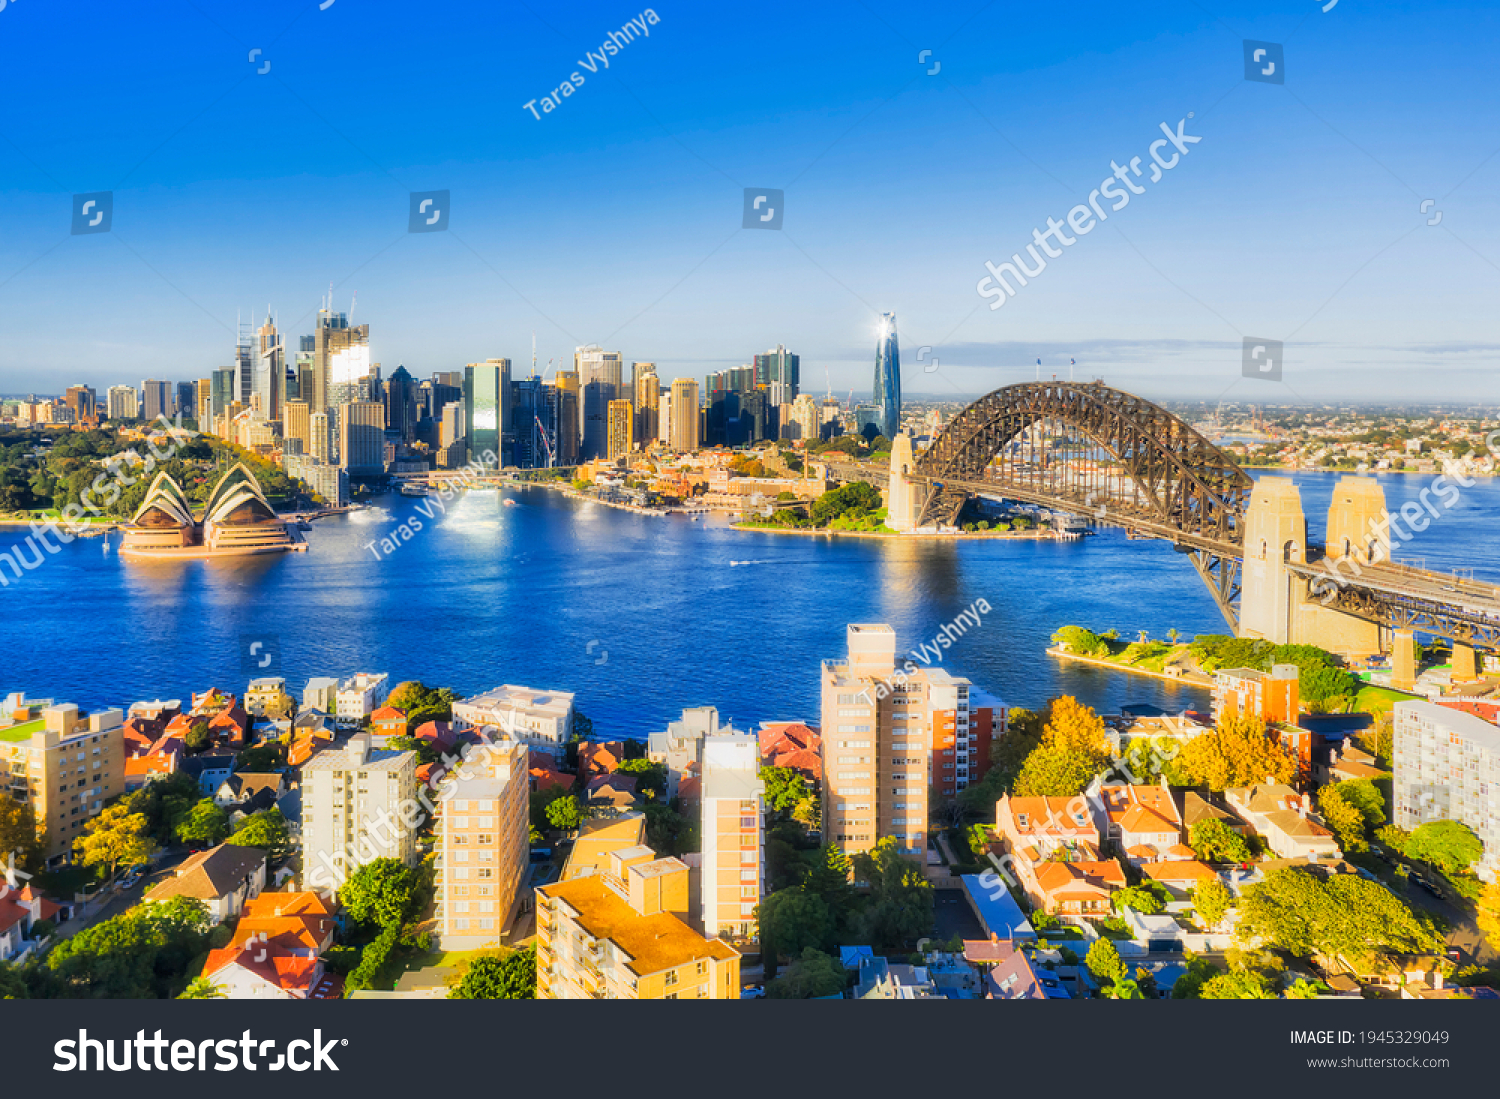 Circular Quay, THe rocks, Barangaroo and major Sydney city architectural landmarks on waterfront of Harbour - aerial view from Kirribilli. #1945329049